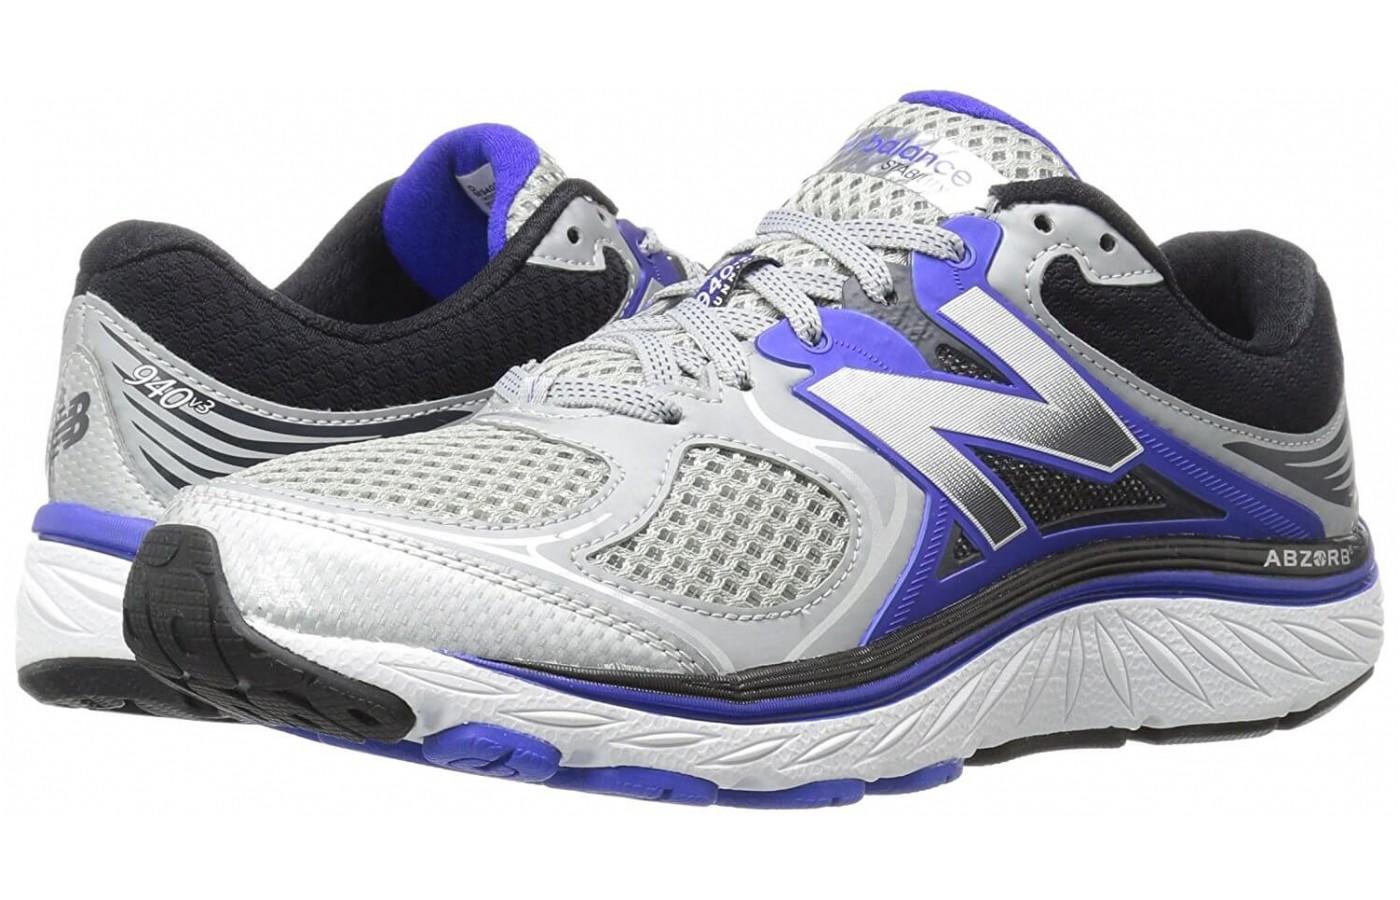 The New Balance 940V3 is said to be one of the most comfortable running shoe on the market. 